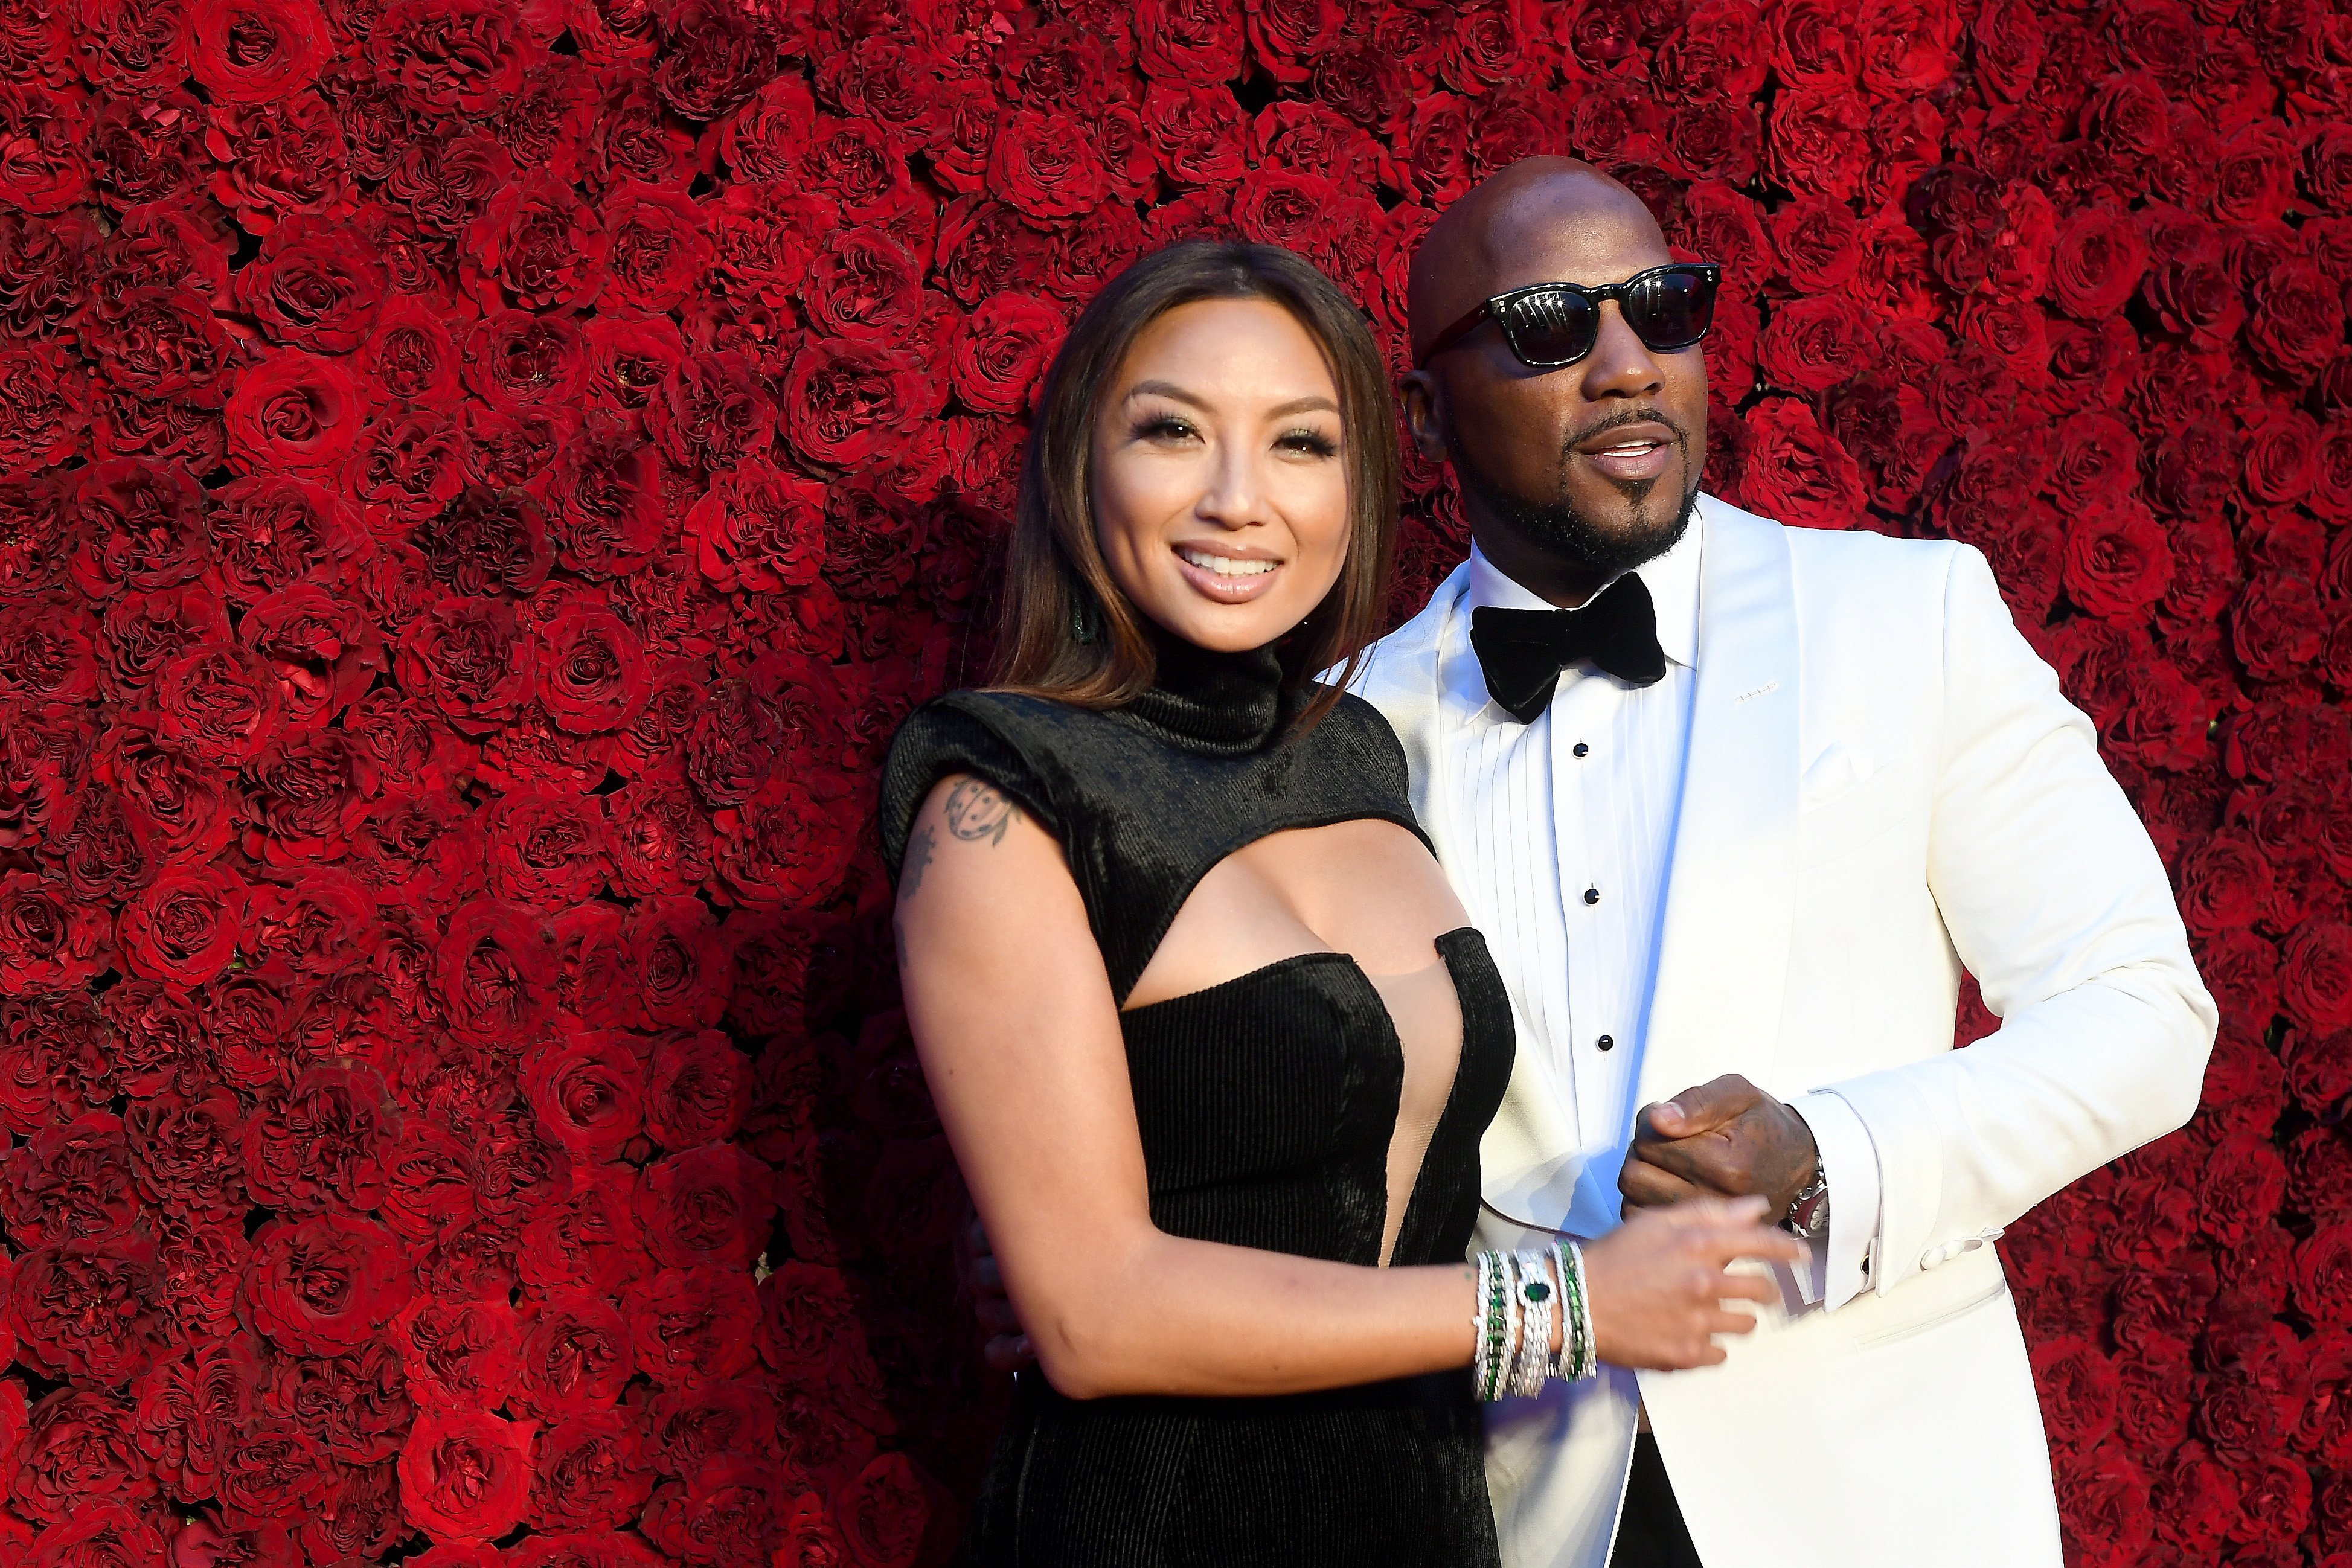 Jeannie Mai and boyfriend, Jeezy at the red carpet during the grand opening of TYler Perry Studios in October 2019. | Photo: Getty Images